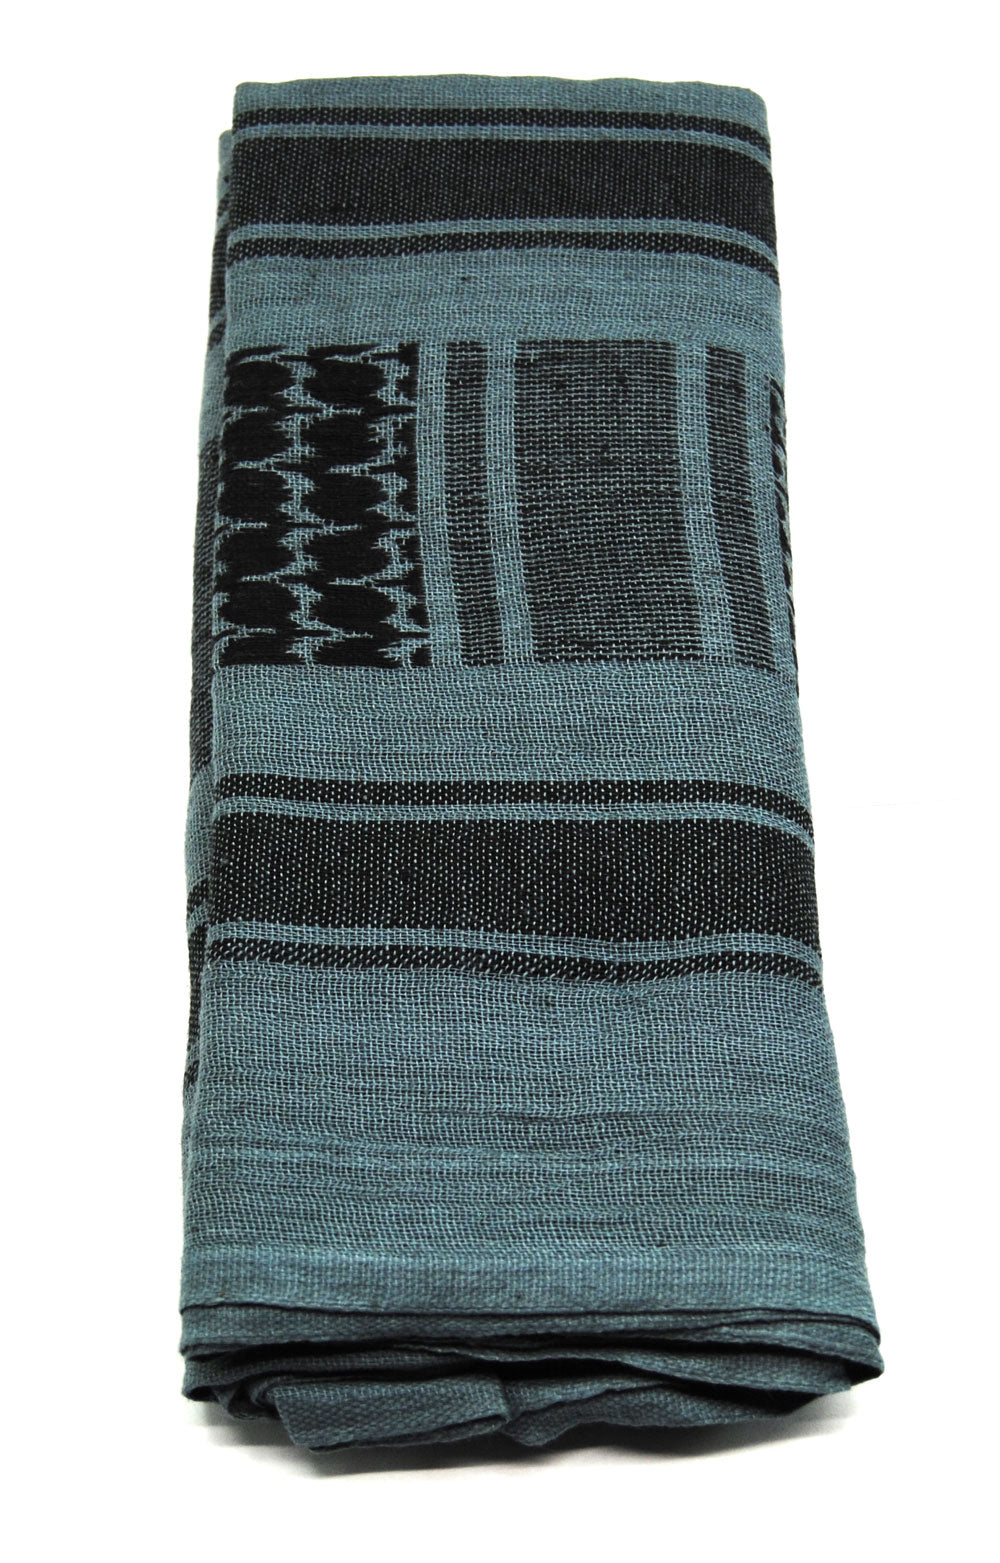 First Strike Outdoor Shemagh Scarf - Grey/Black - First Strike